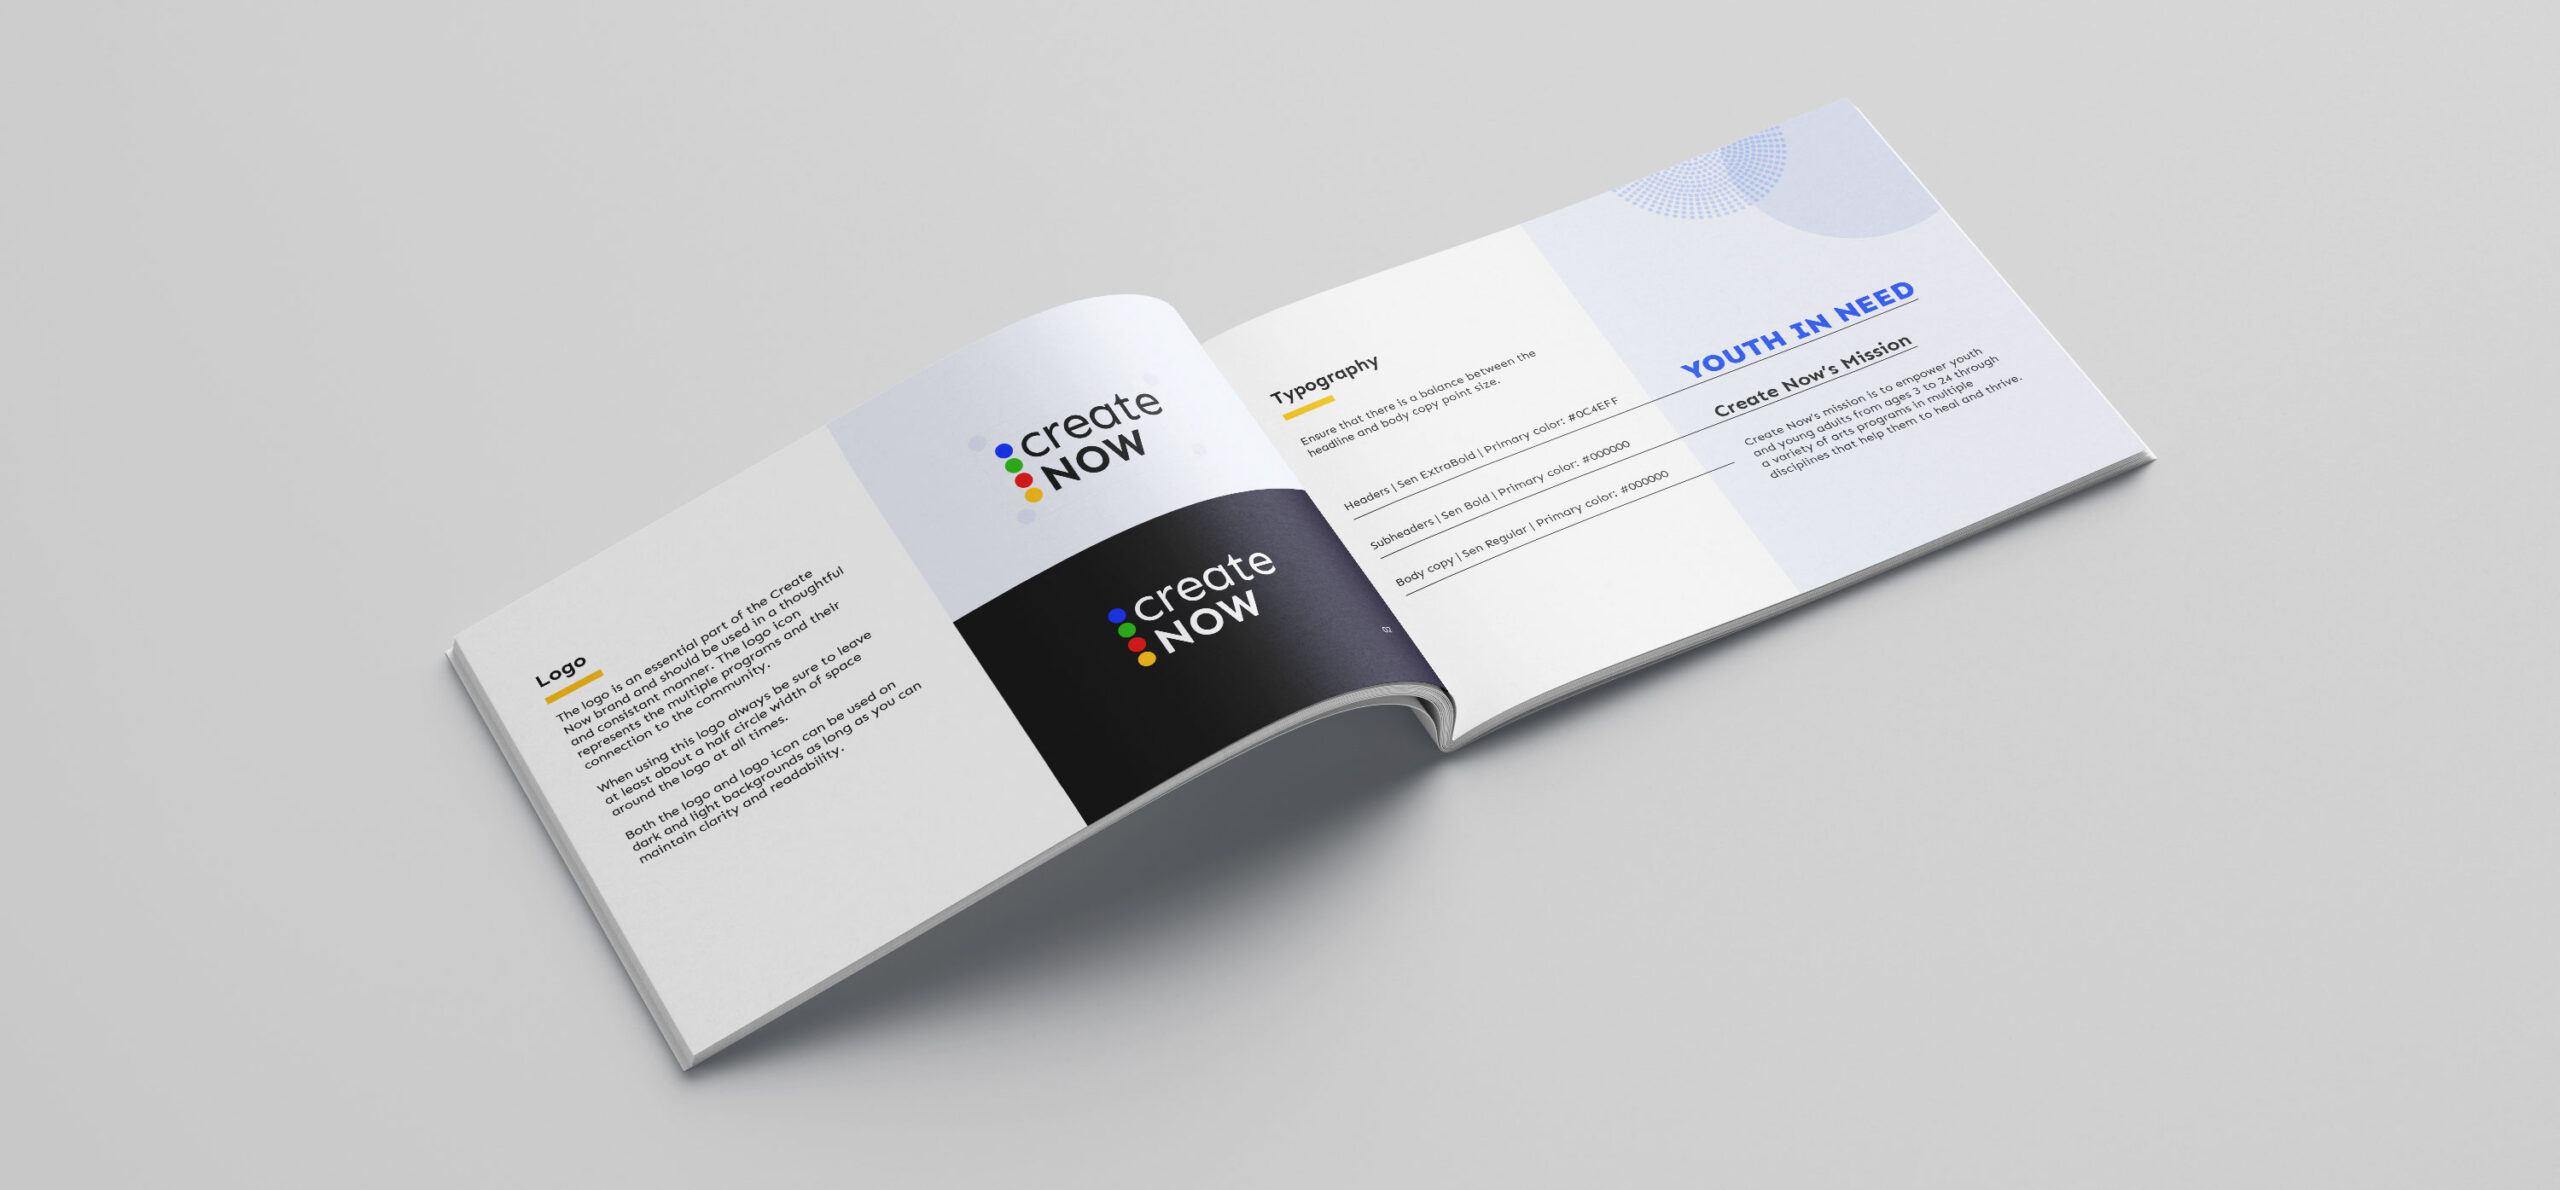 Mad Fish Digital's brand guidelines booklet for Create Now.